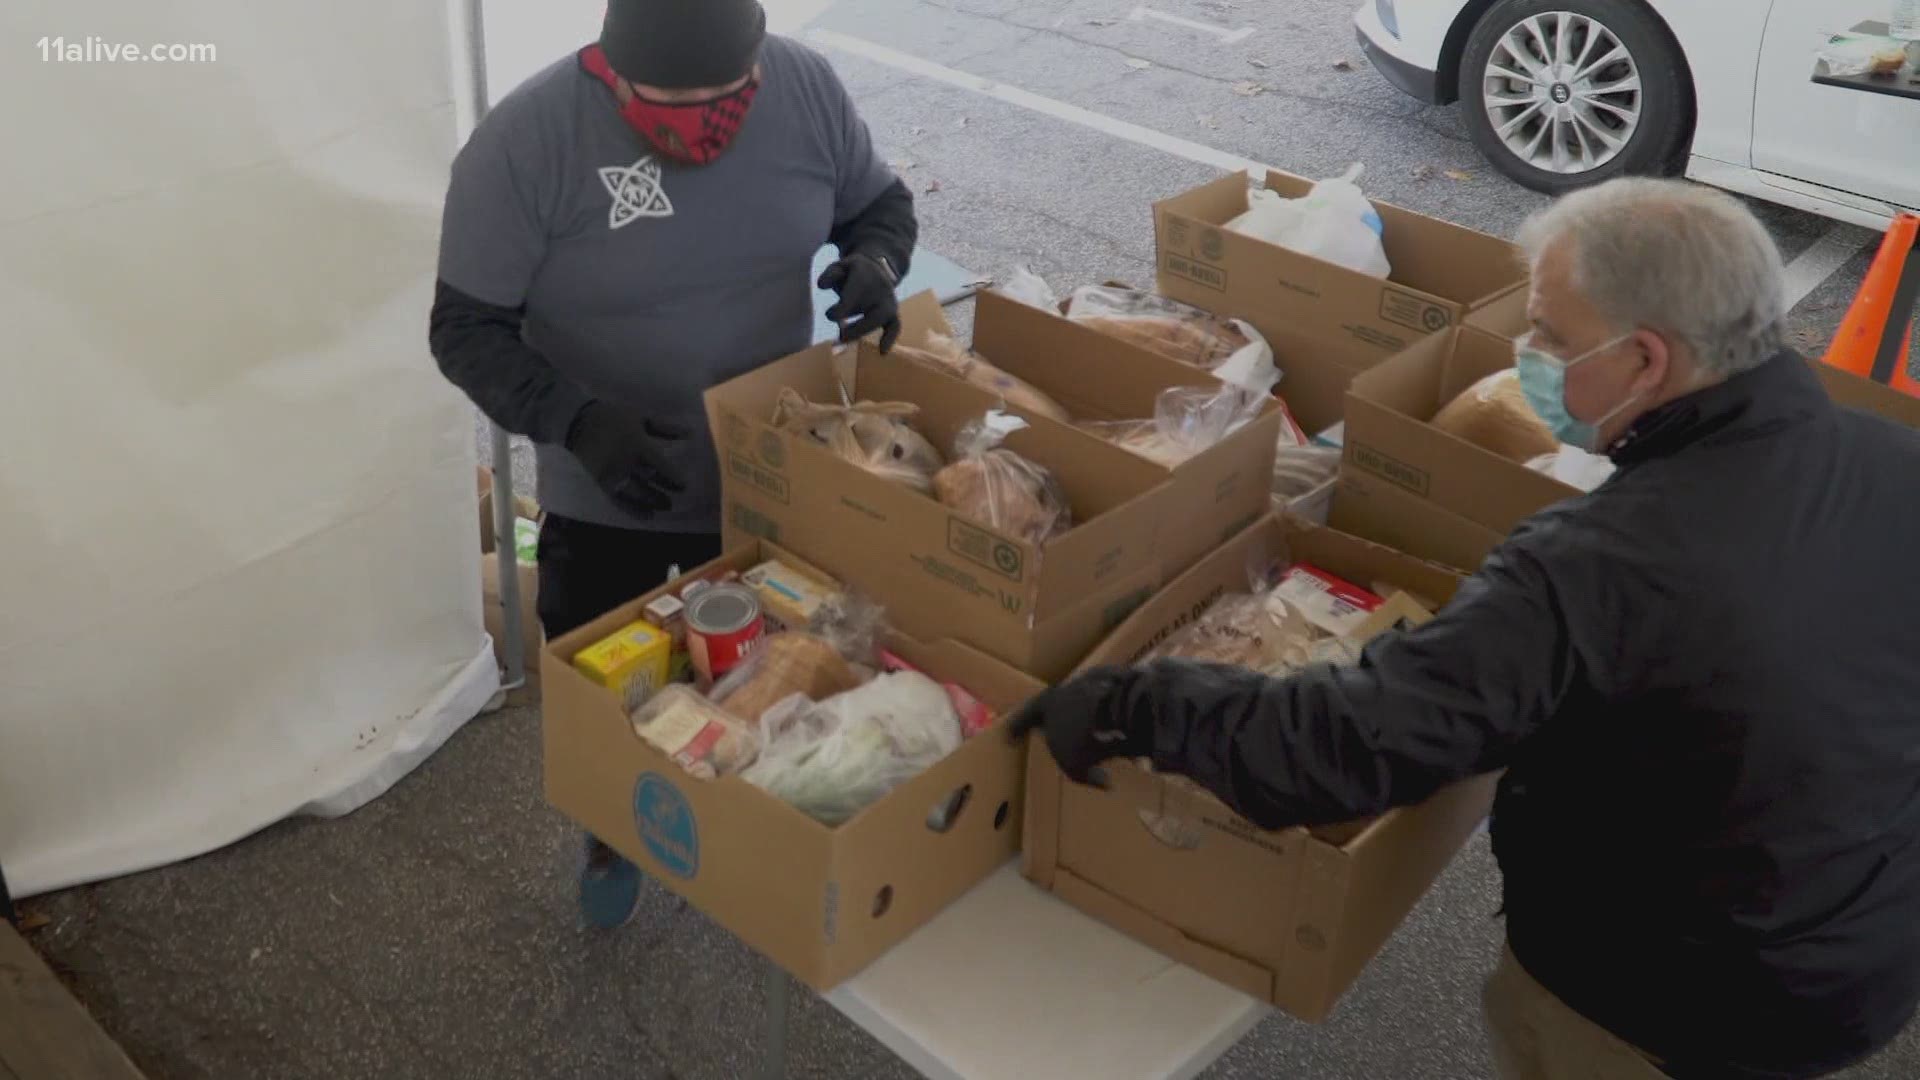 It's a group effort to provide food to those in need. Donate, volunteer, or find help from the Atlanta Community Food Bank at 404-892-FEED.